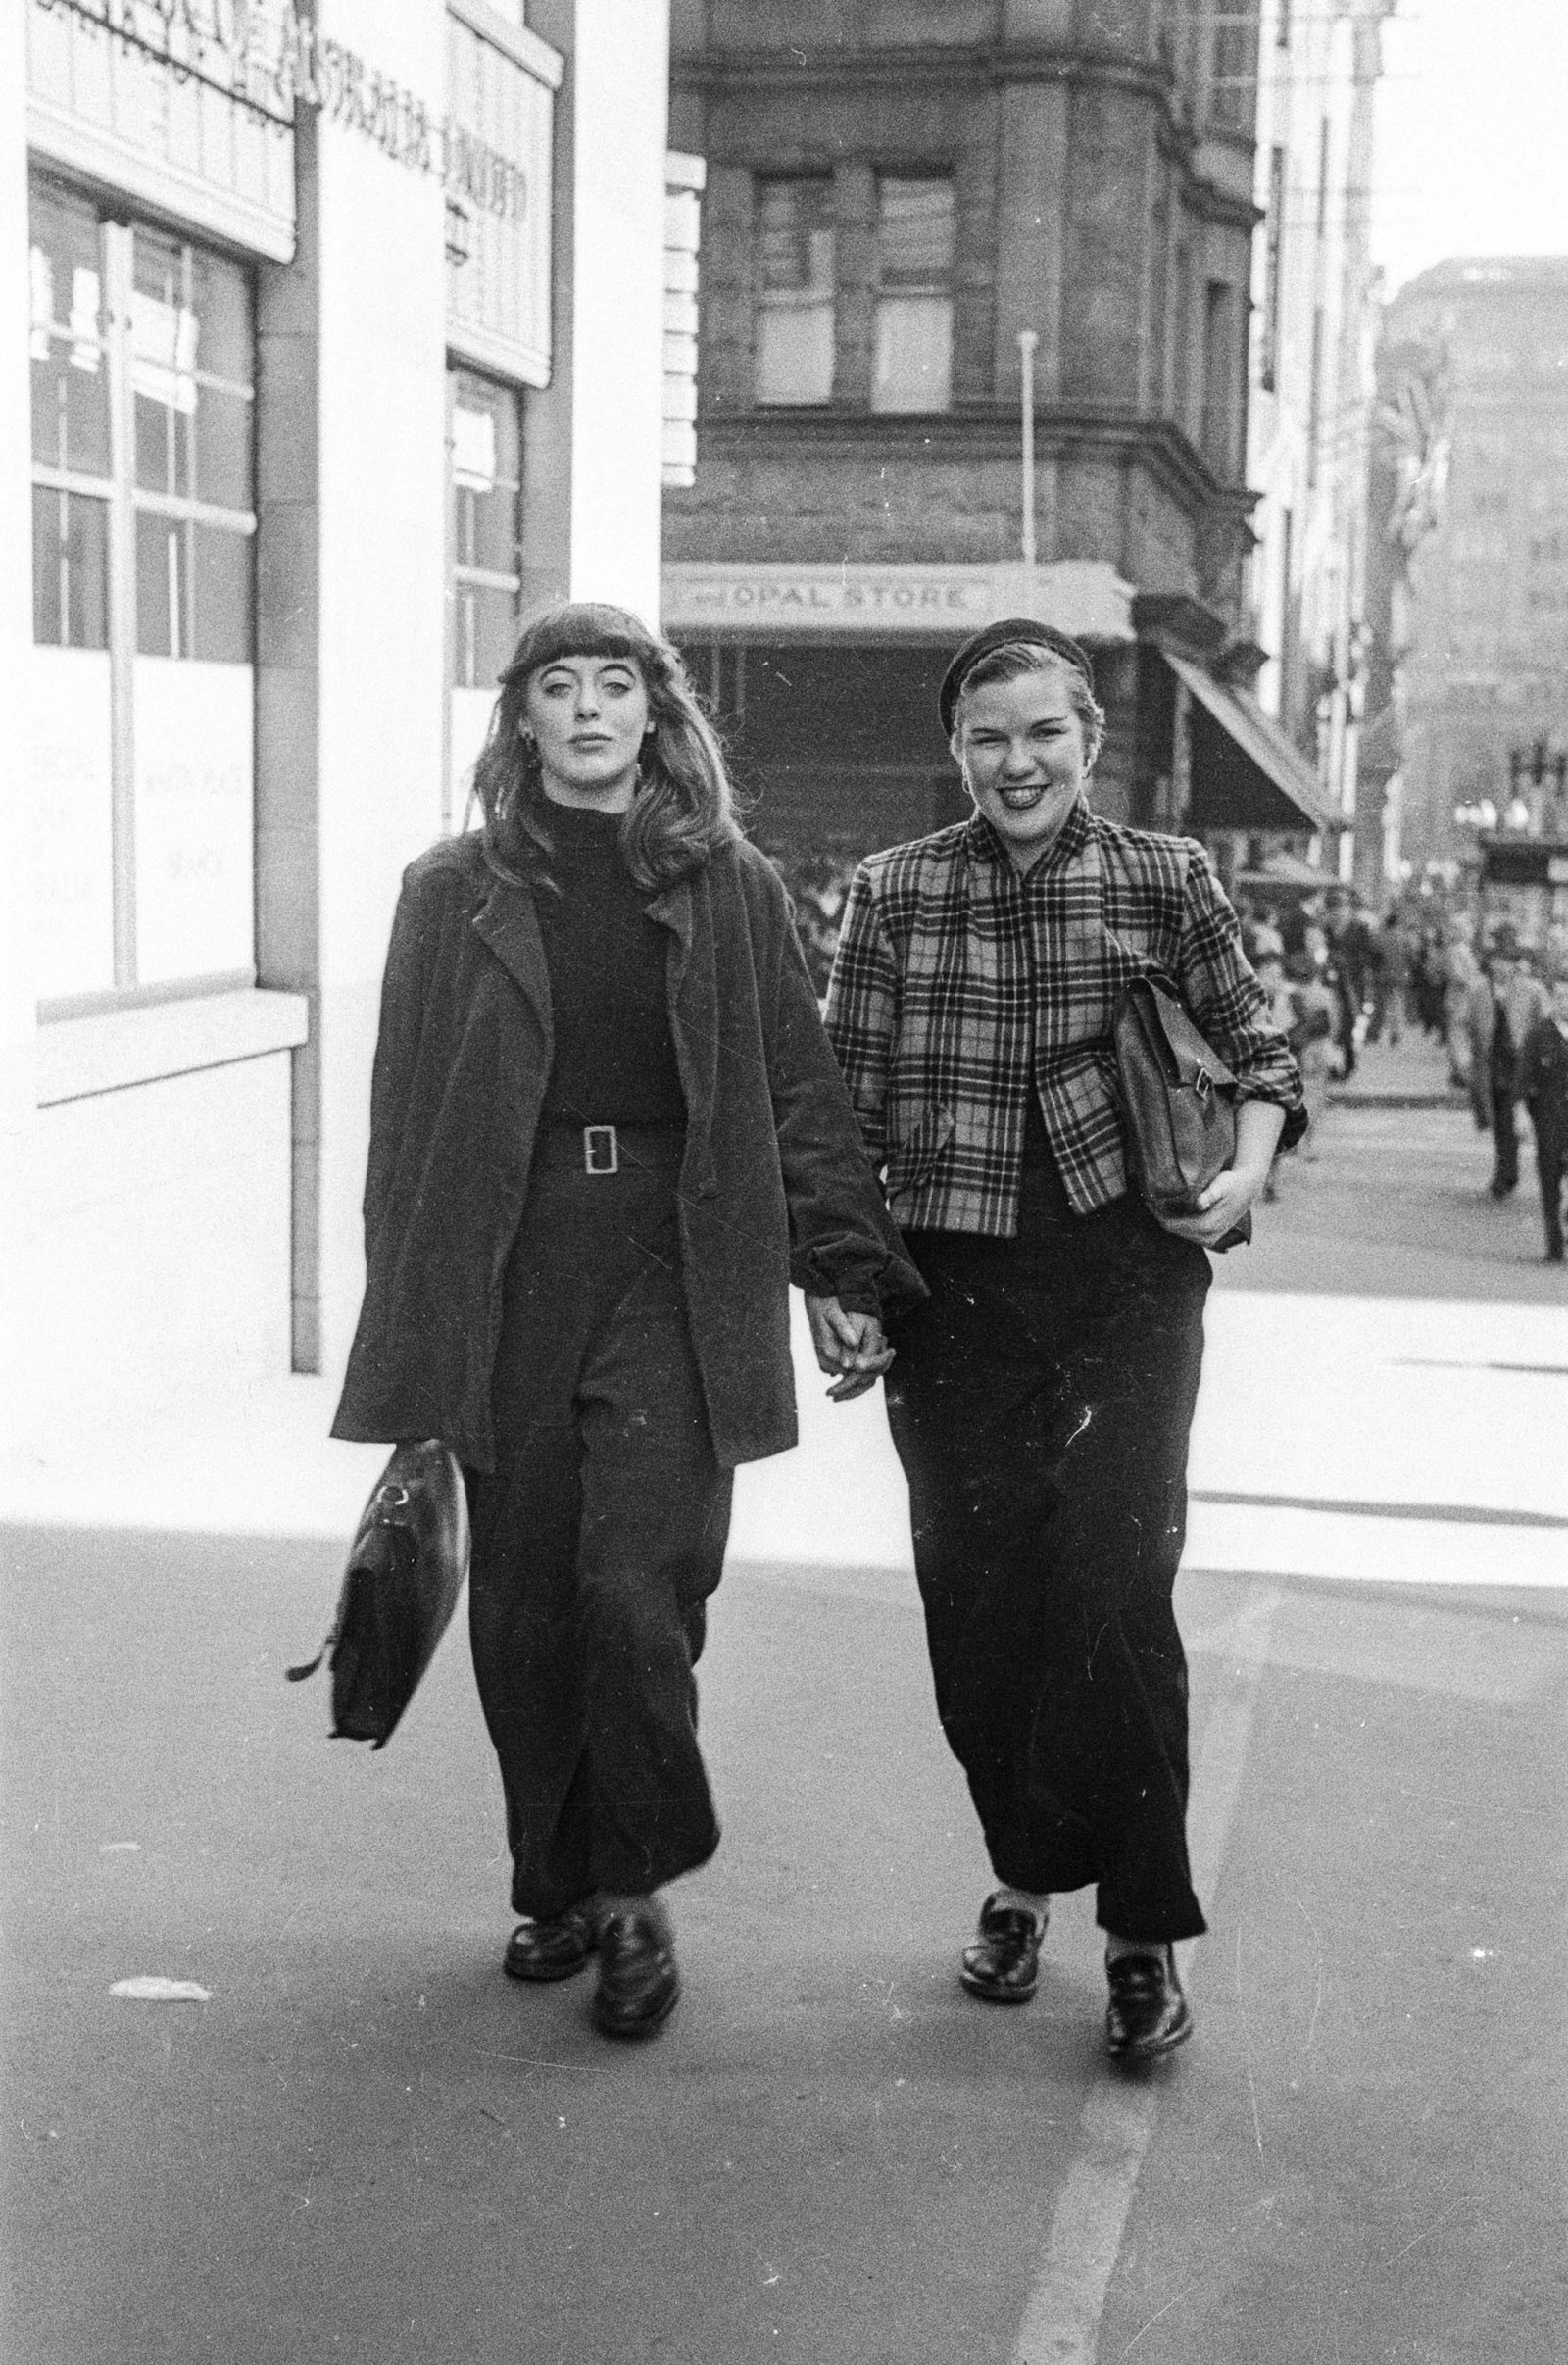 Black & white candid photo of people walking down city street.